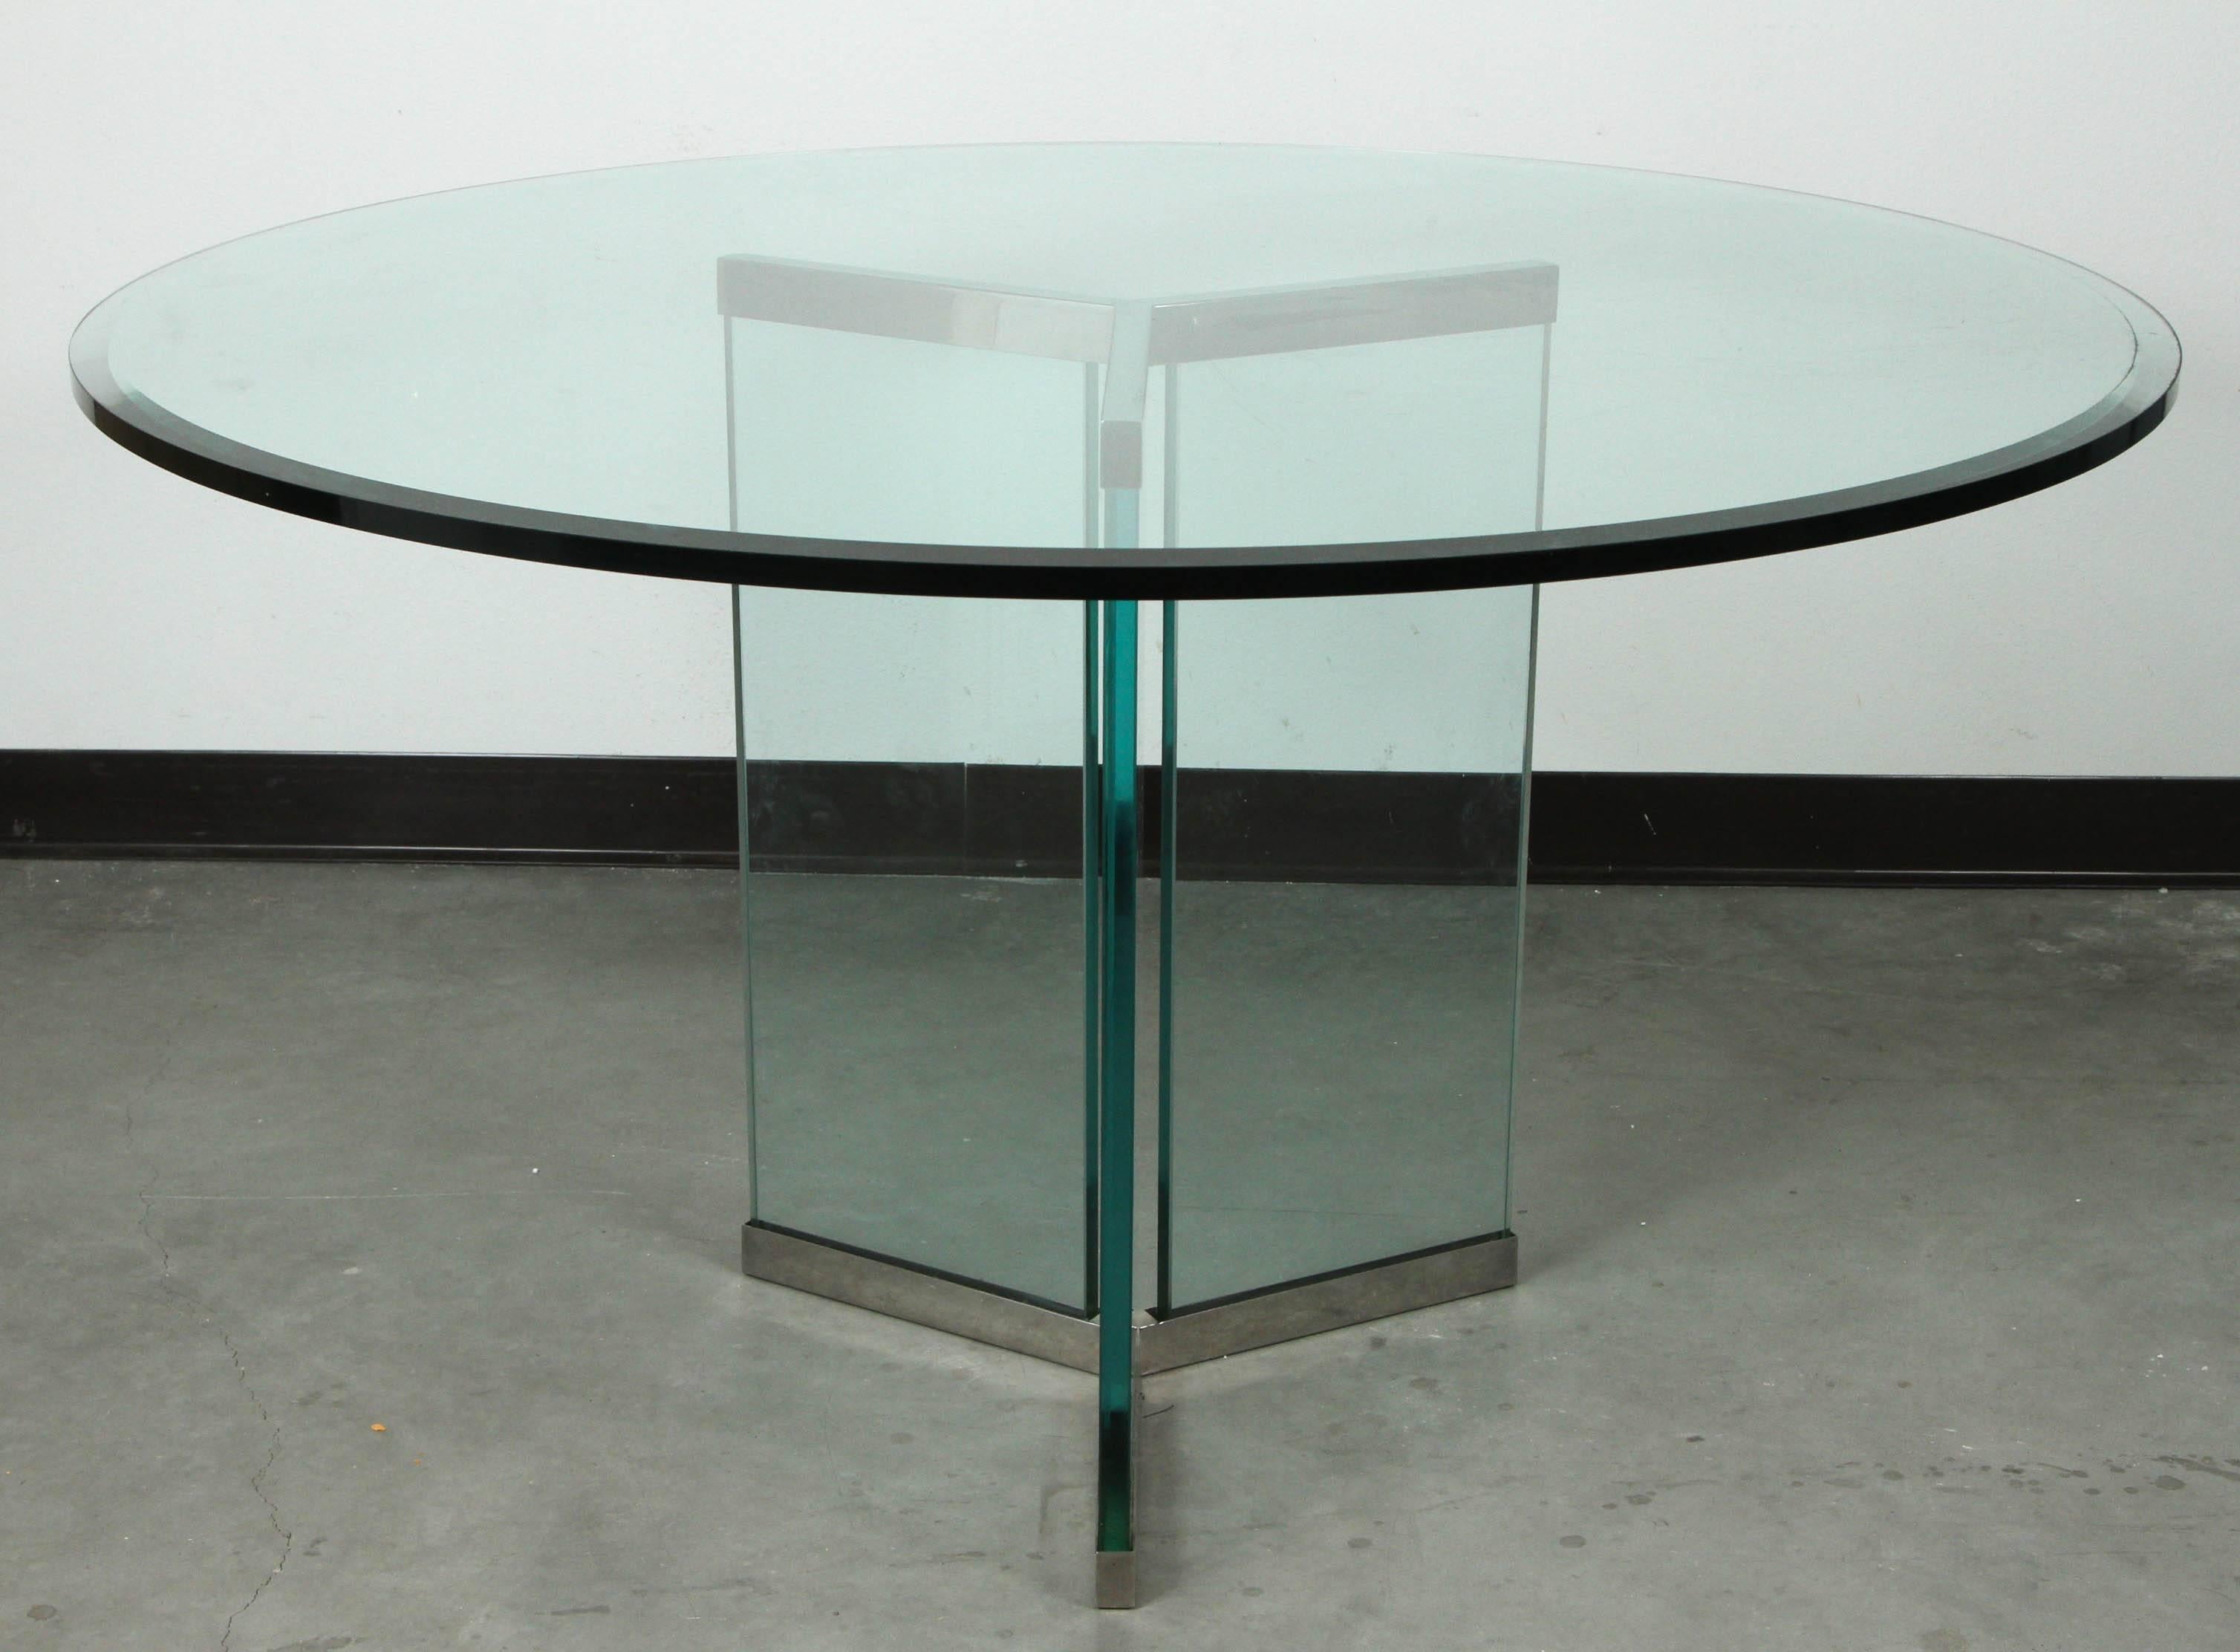 Minimalist dining table by Leon Rosen Pace. 
The triangular glass and polished chrome pedestal base supports a 1/2